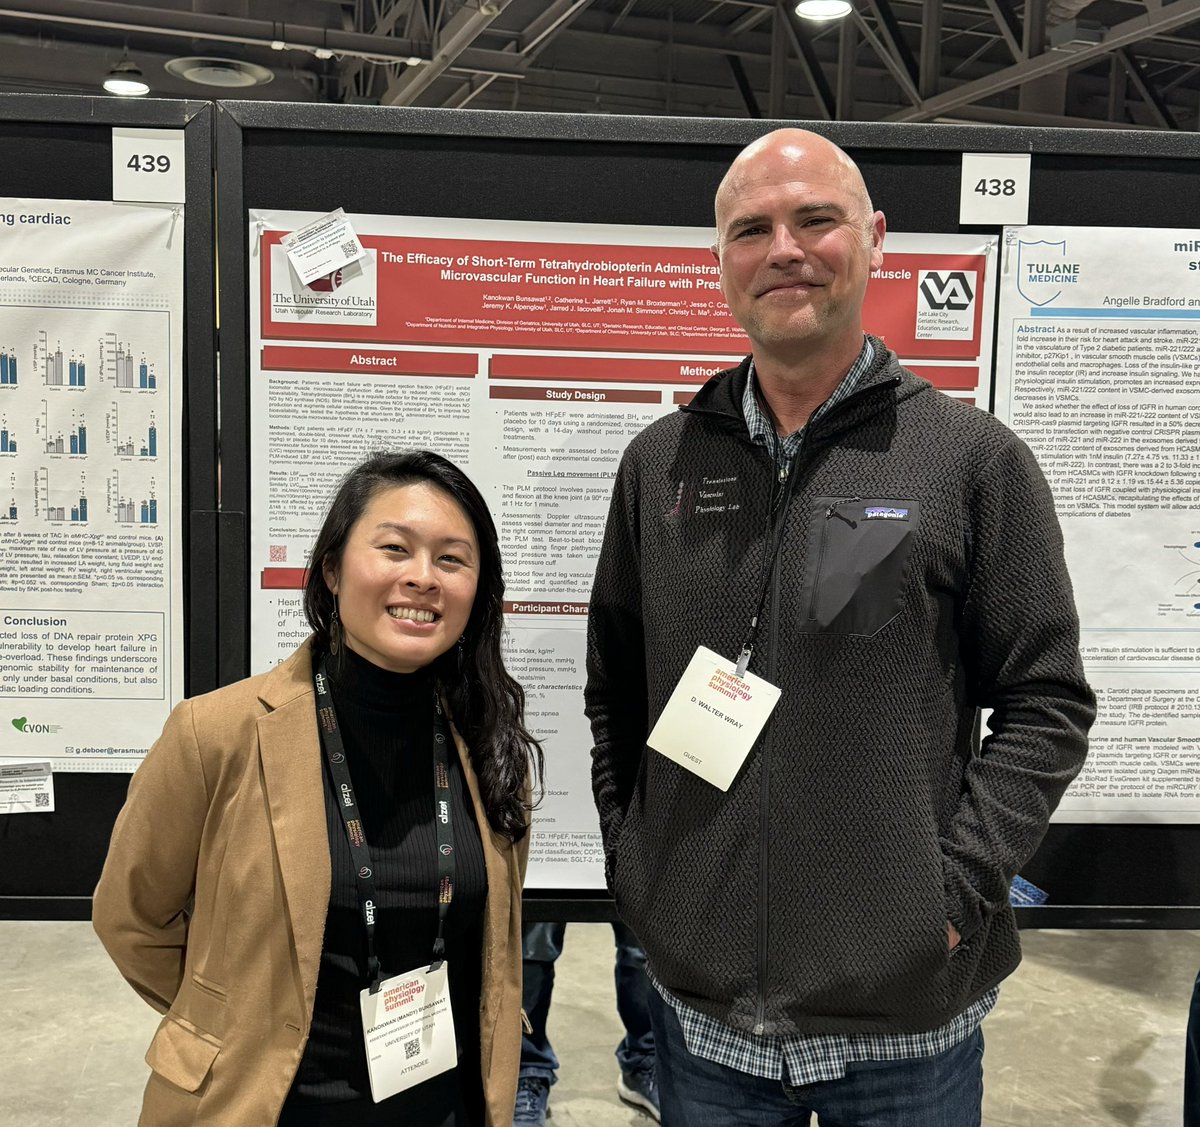 Another great #APS2024 meeting showcasing some of our work from the #UVRL and (re)connecting with new and old friends and colleagues. Until next time! @APSPhysiology @UVRLphysiology @UtahGeriatrics @UUtah